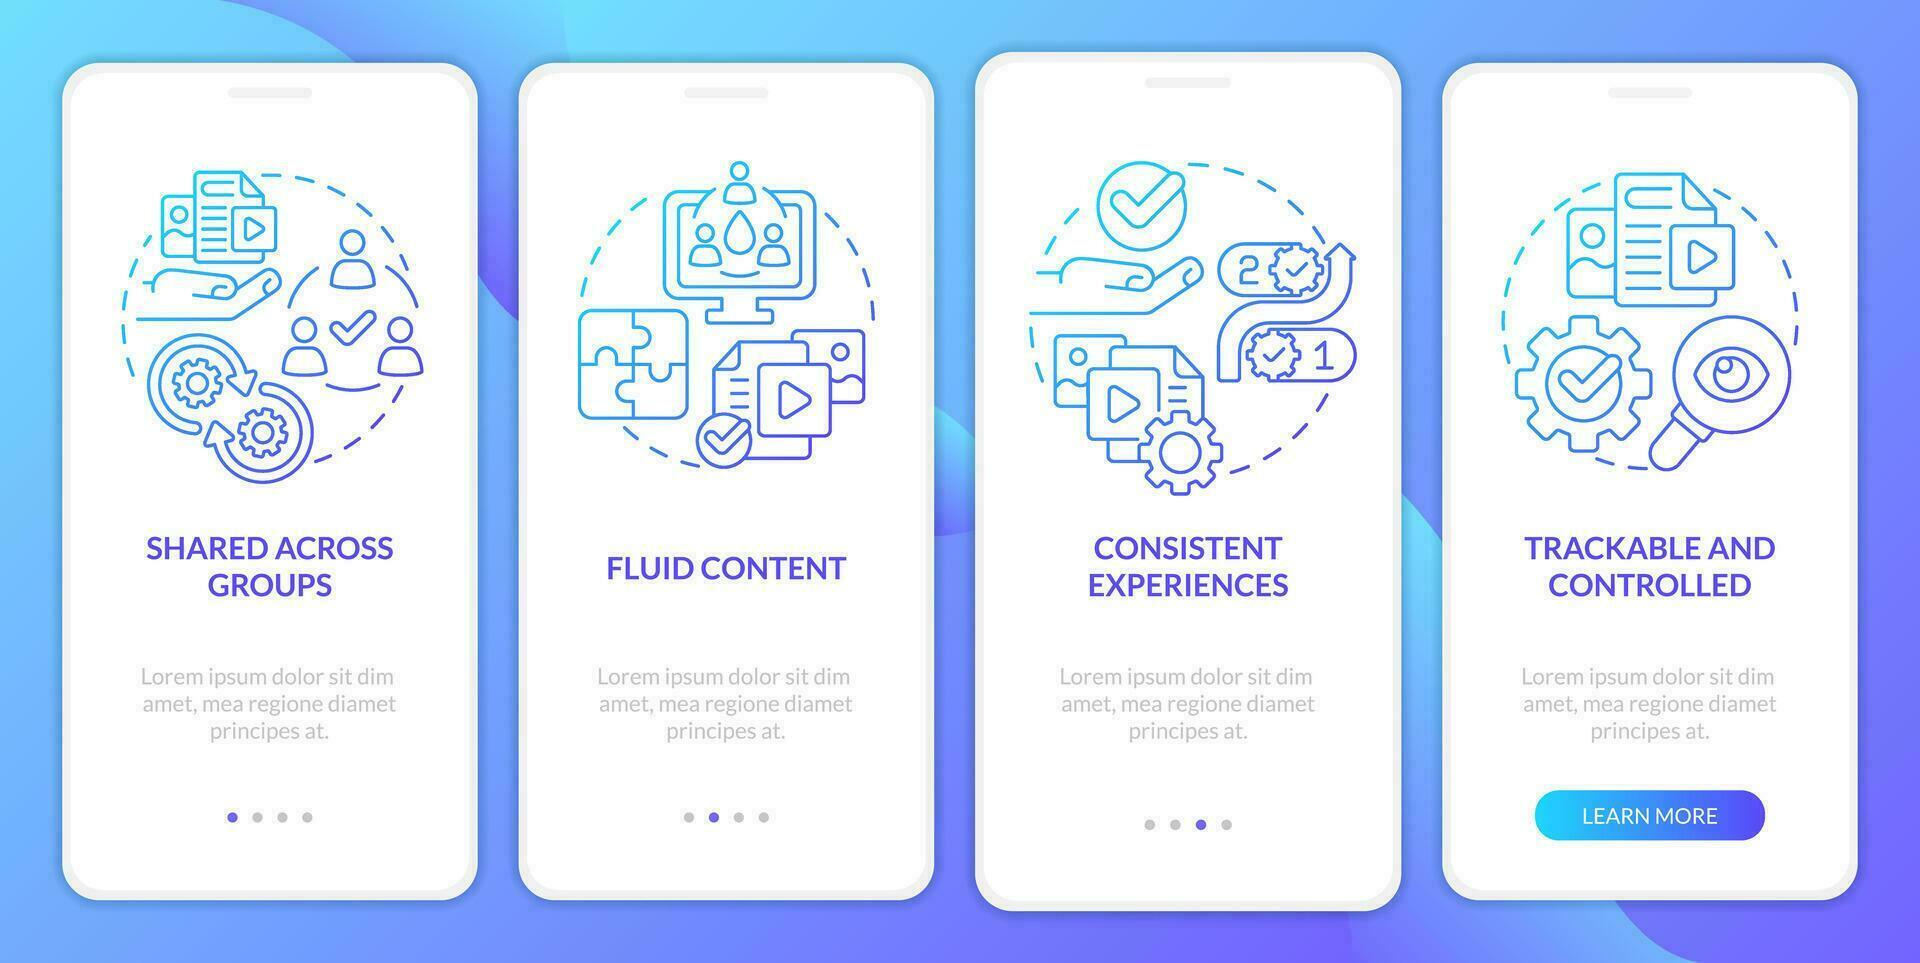 Content tips blue gradient onboarding mobile app screen. Design creating walkthrough 4 steps graphic instructions with linear concepts. UI, UX, GUI template vector